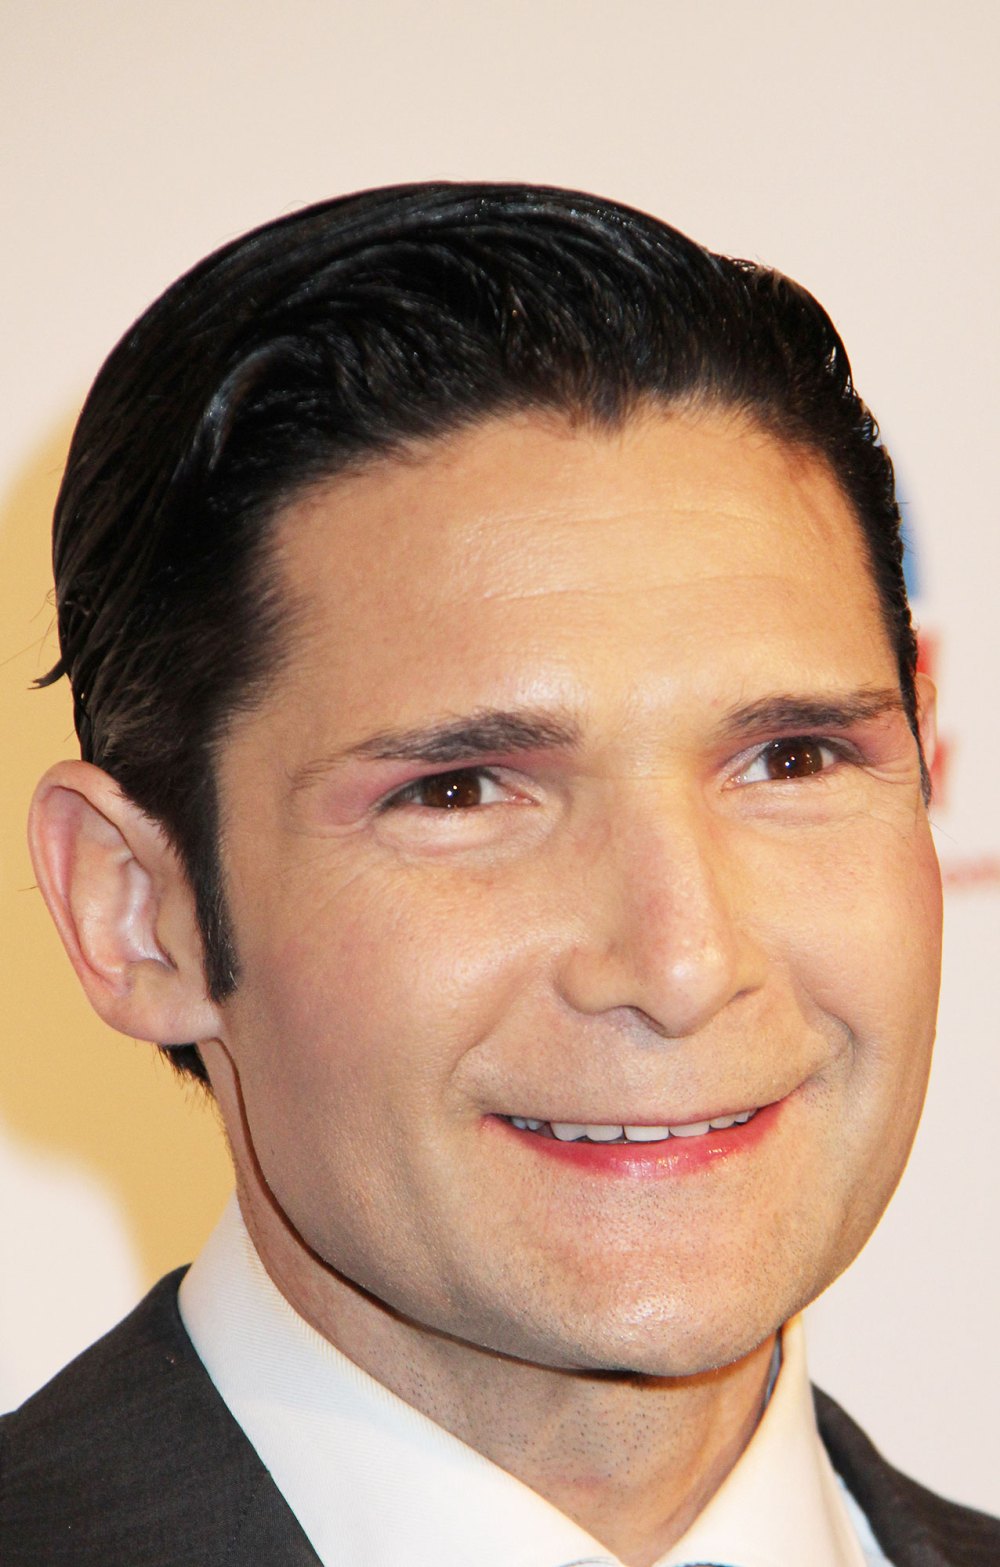 Fans Support Corey Feldman After He Cries Over Bullying From ‘Today’ Performance